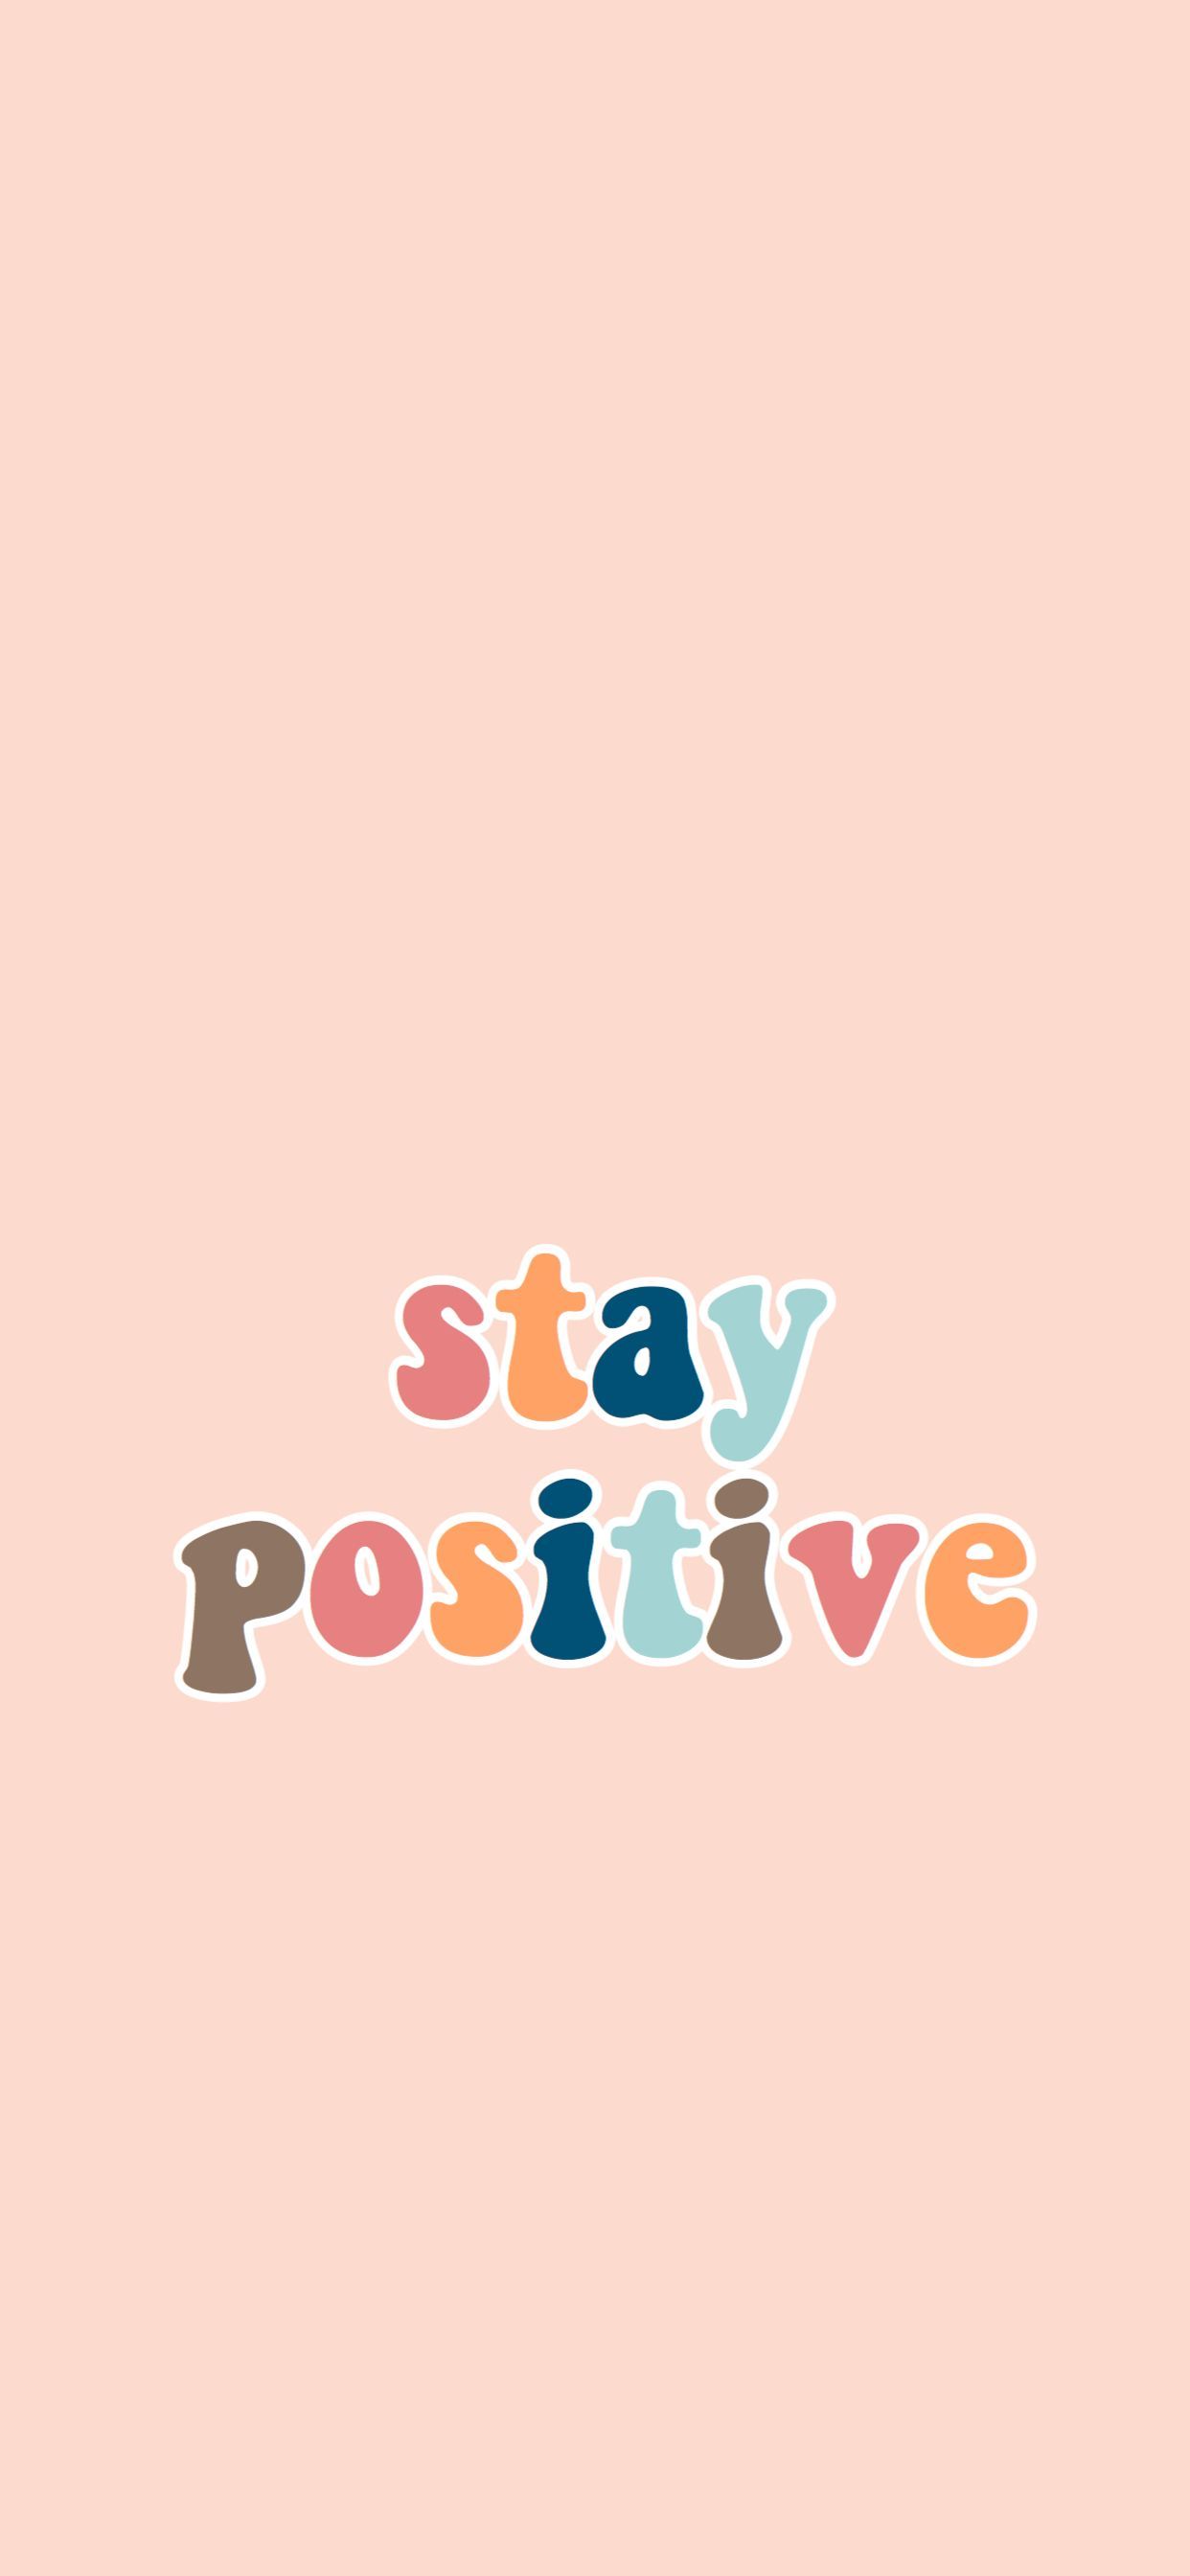 stay positive wallpaper background iphone XS max. Positive wallpaper, iPhone background, Aesthetic iphone wallpaper